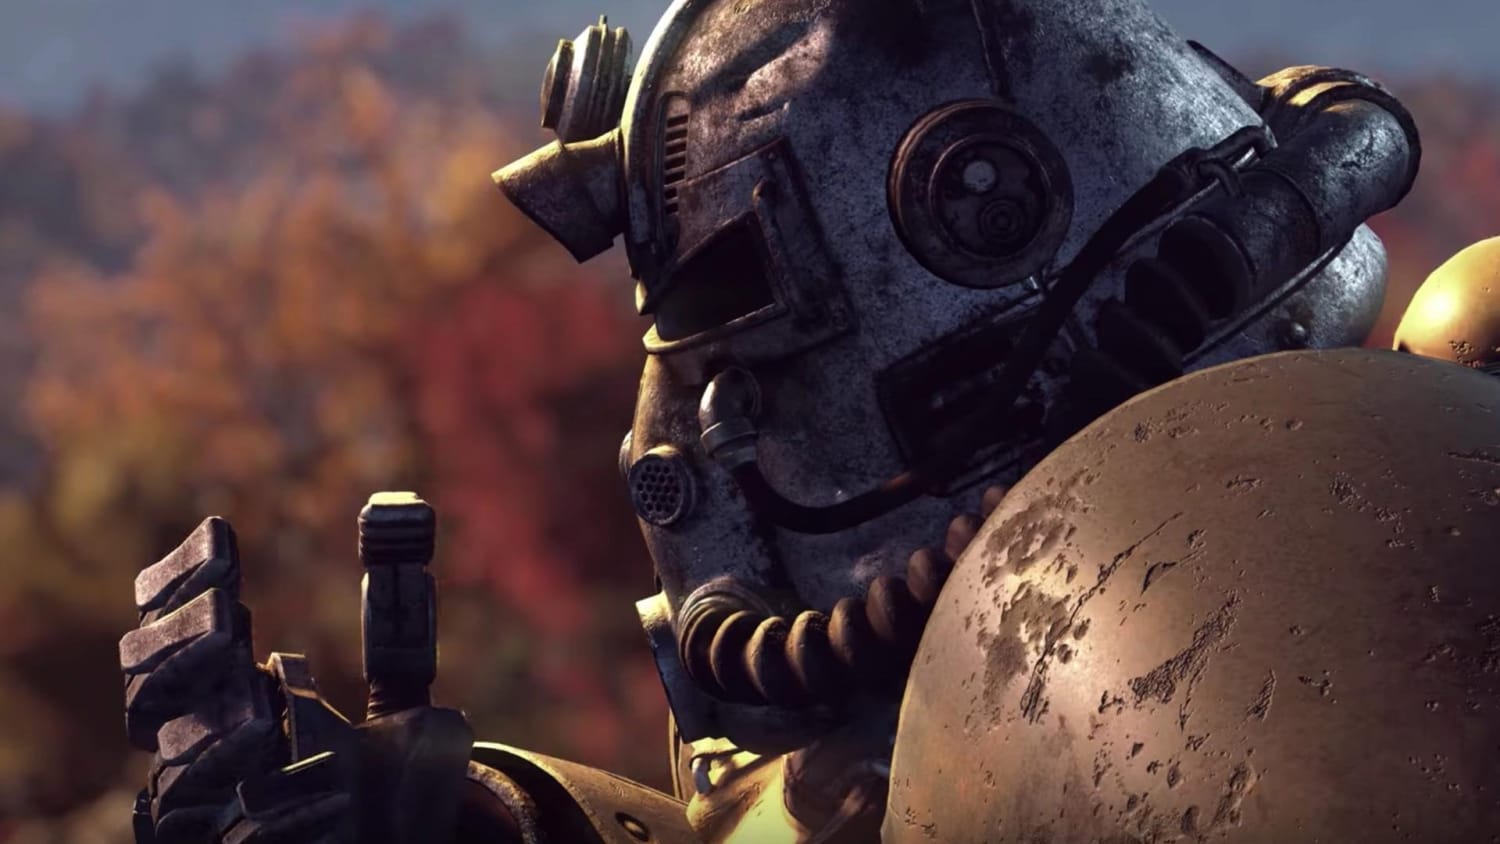 Fallout Vault 76 is an online survival RPG releasing on PS4, Xbox